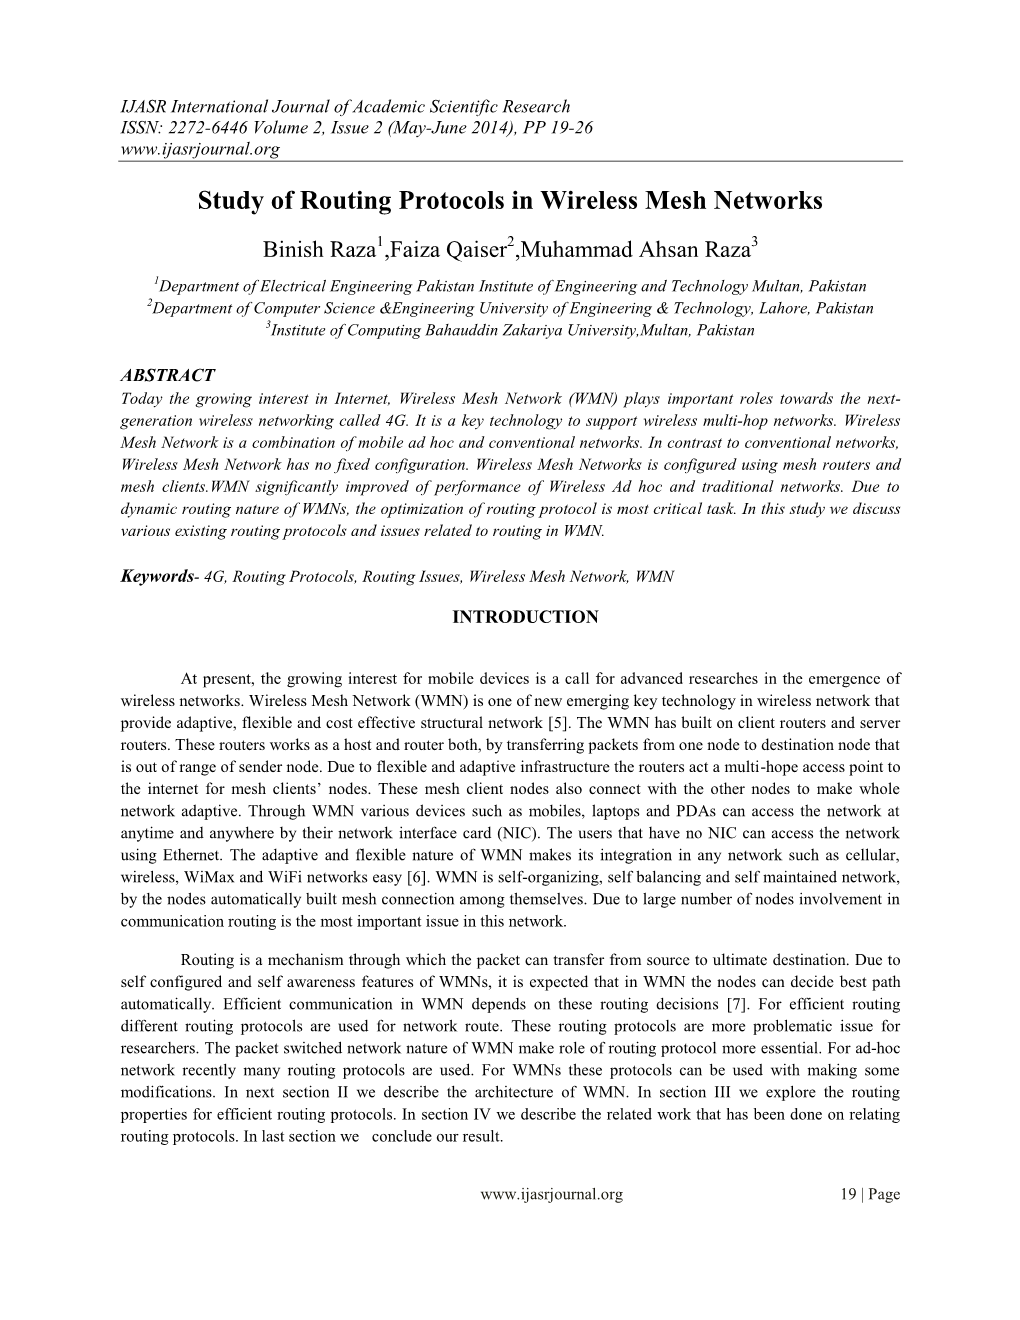 Study of Routing Protocols in Wireless Mesh Networks